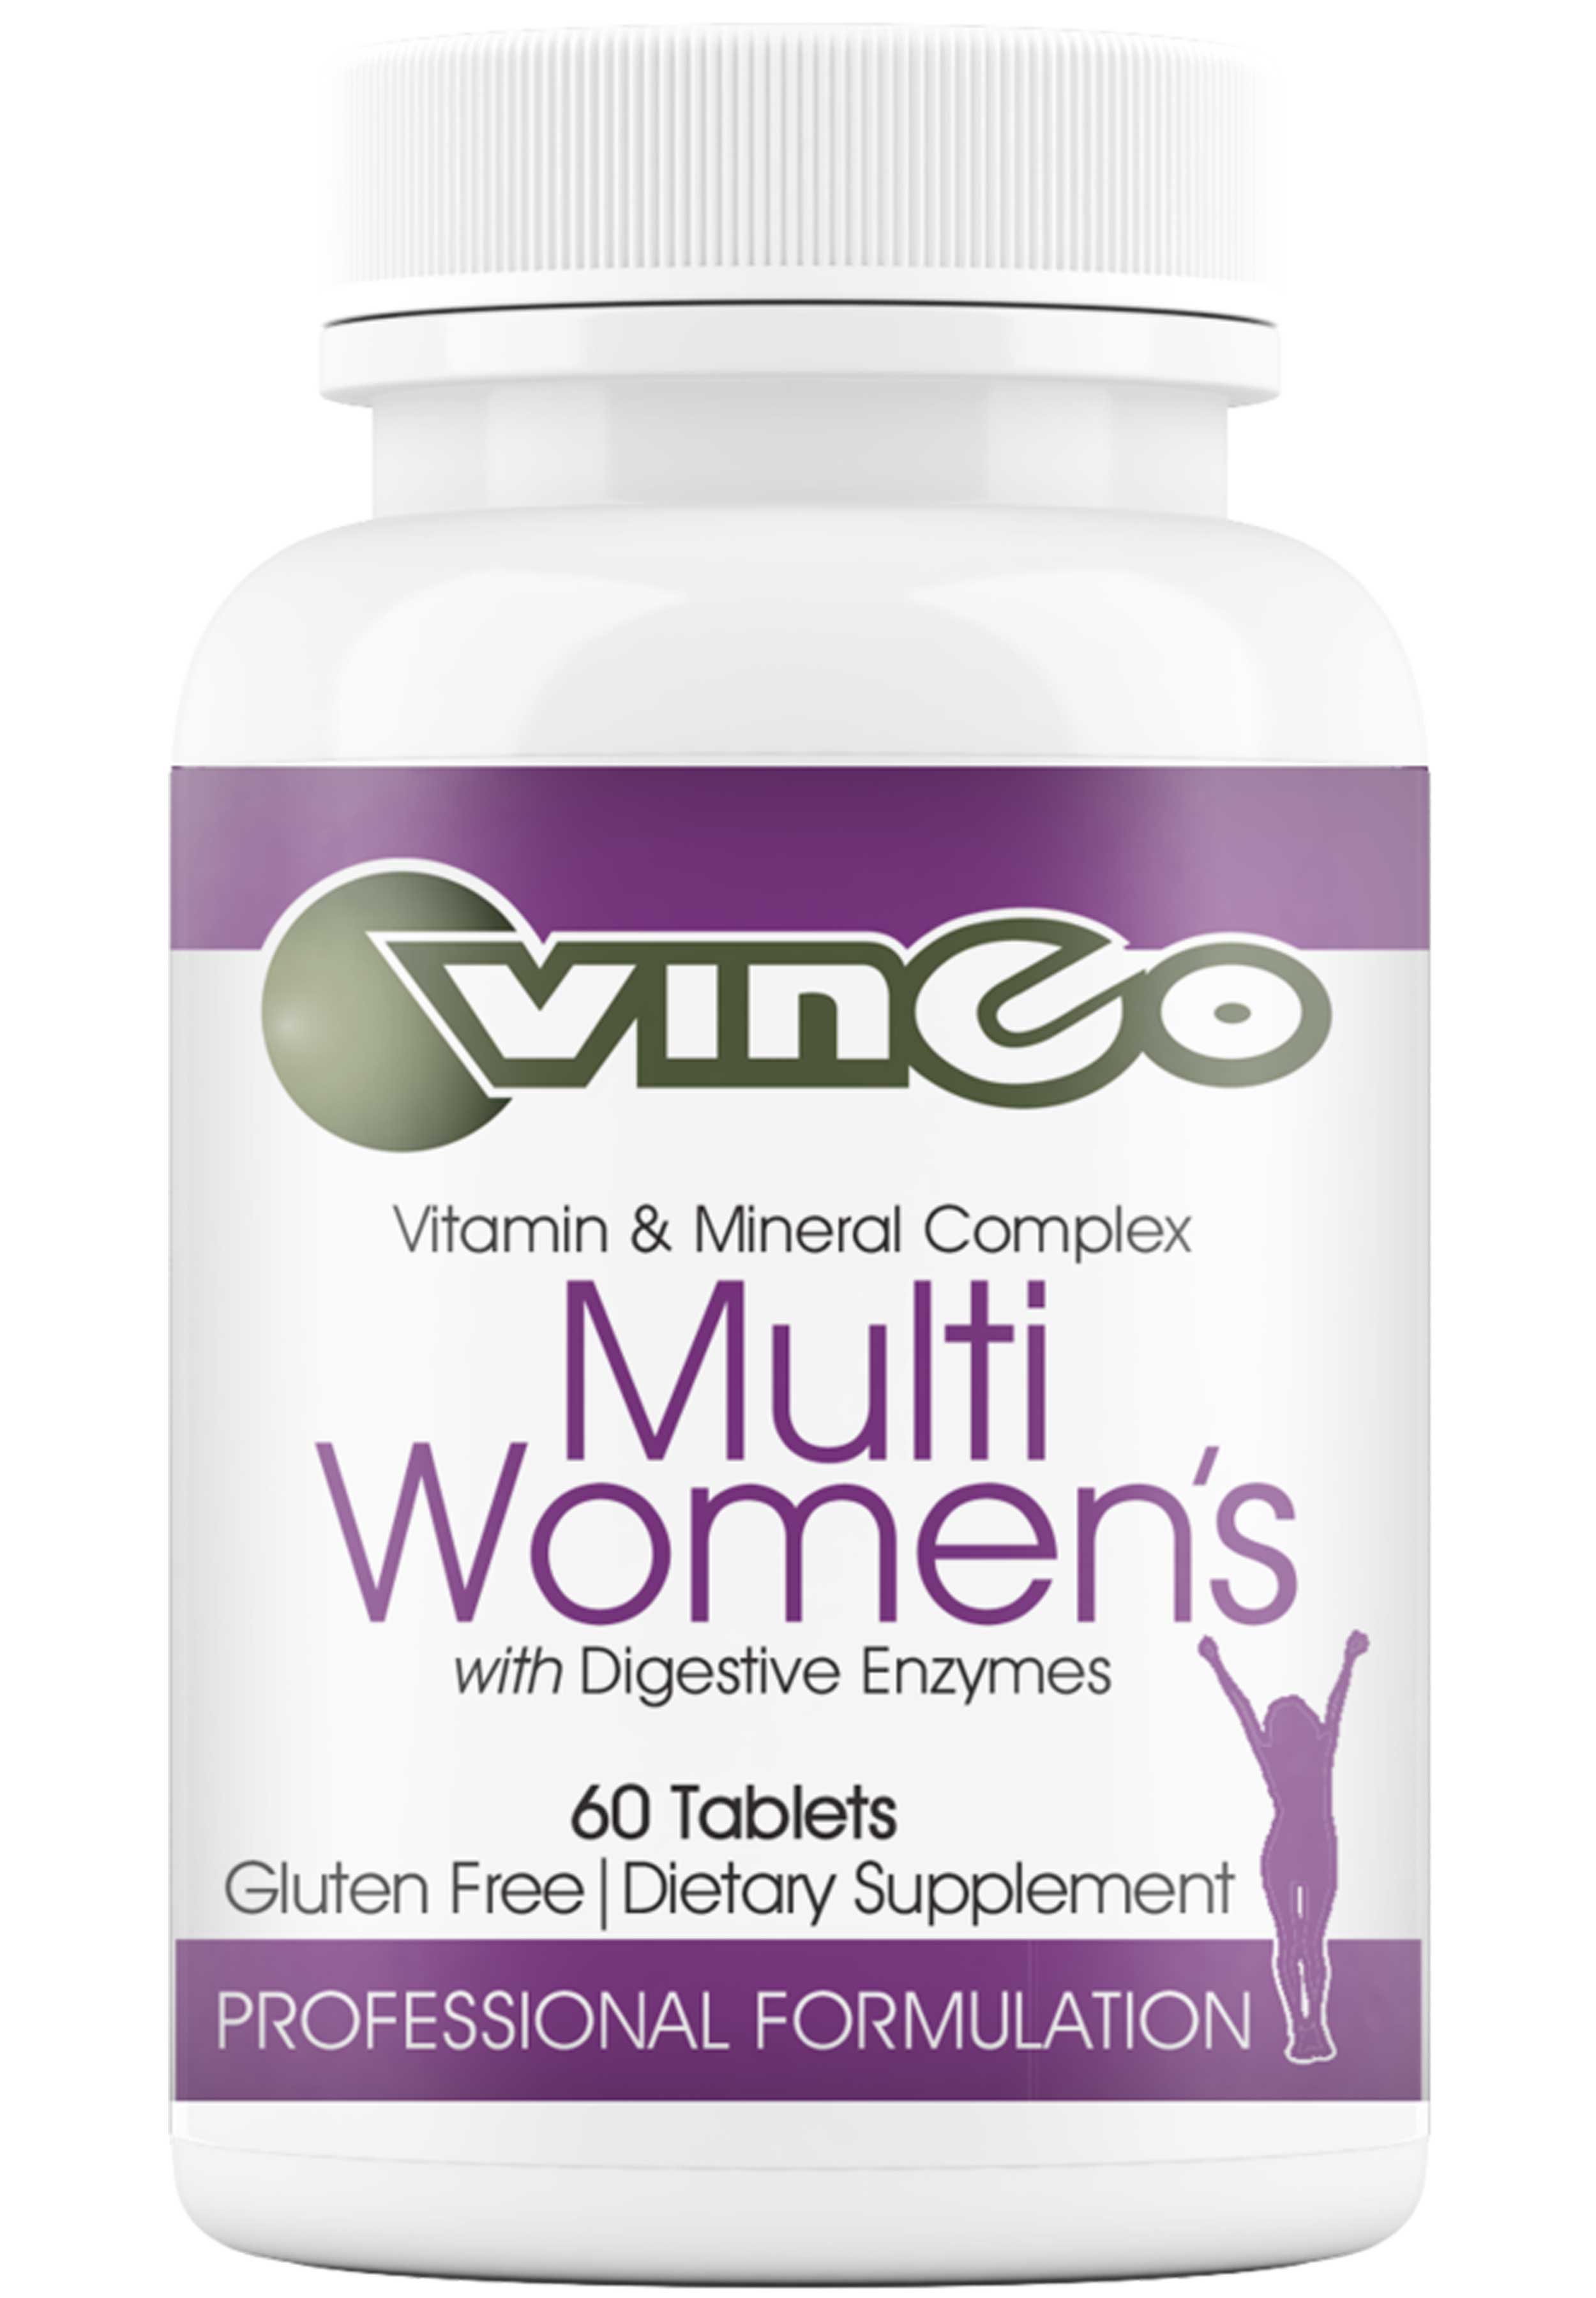 Vinco MultiWomen's with Digestive Enzymes